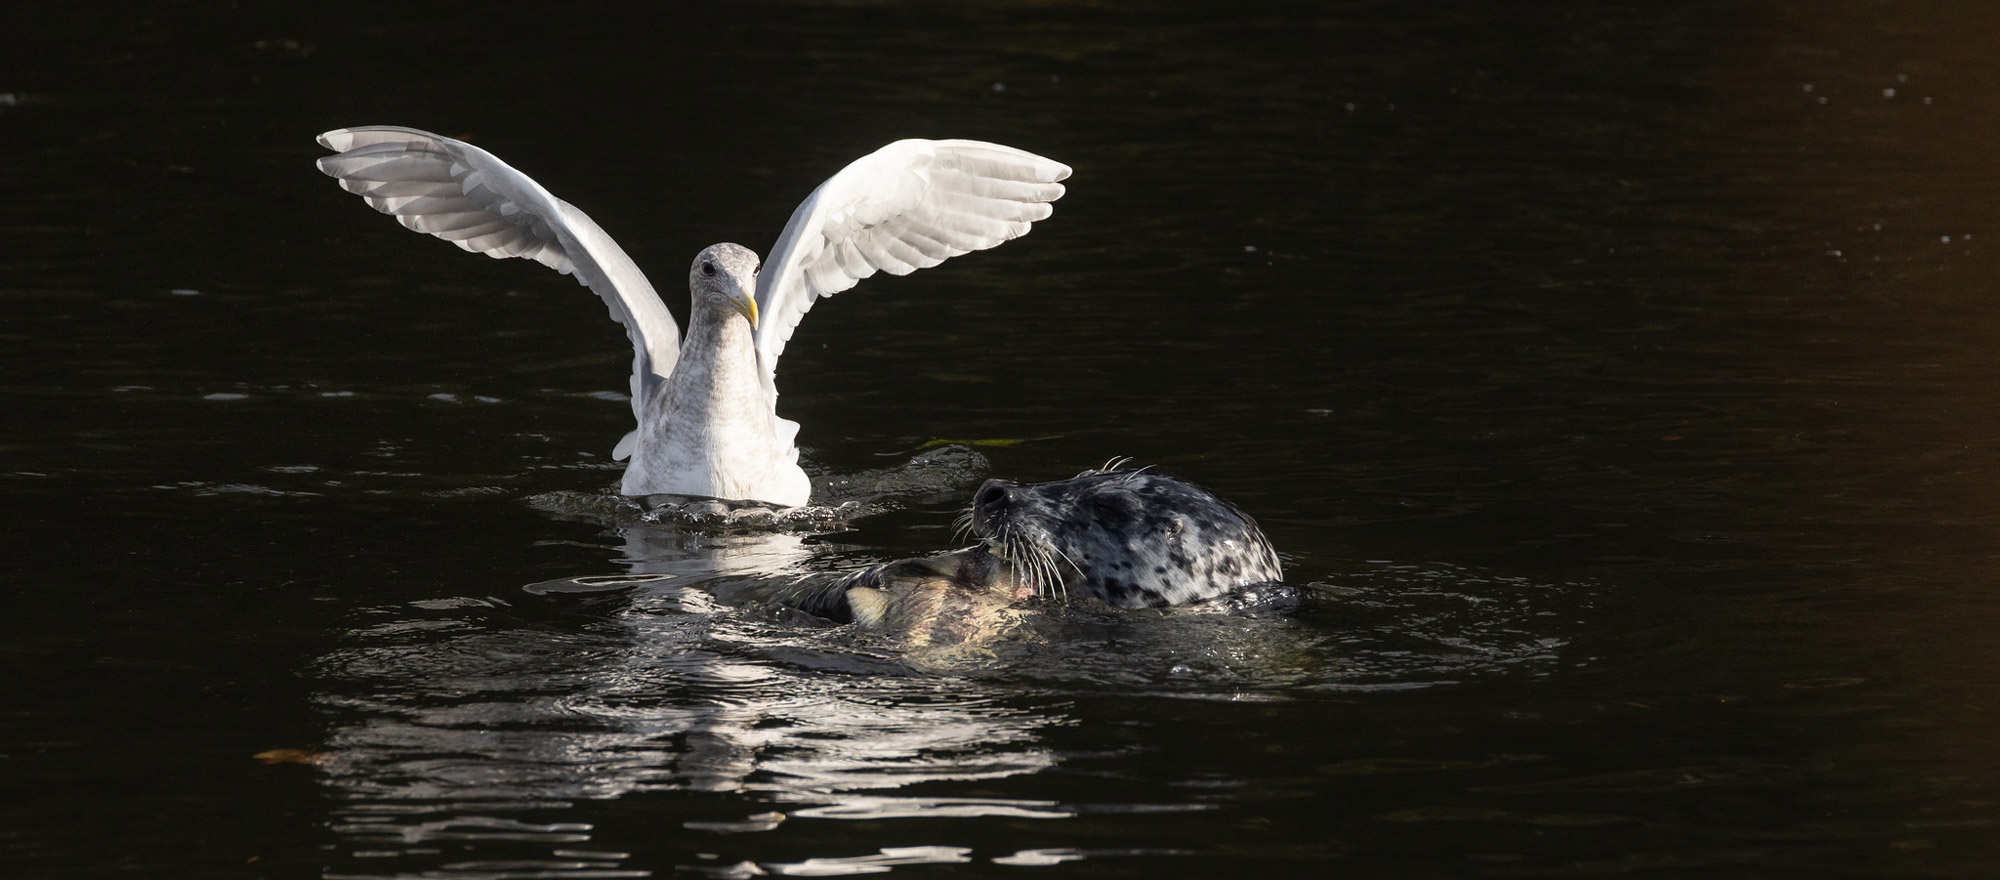 At Whatcom Creek in Bellingham: a large Glaucous-winged gull floats on the water and flaps its wings. It looks at a Harbor seal catching a salmon.